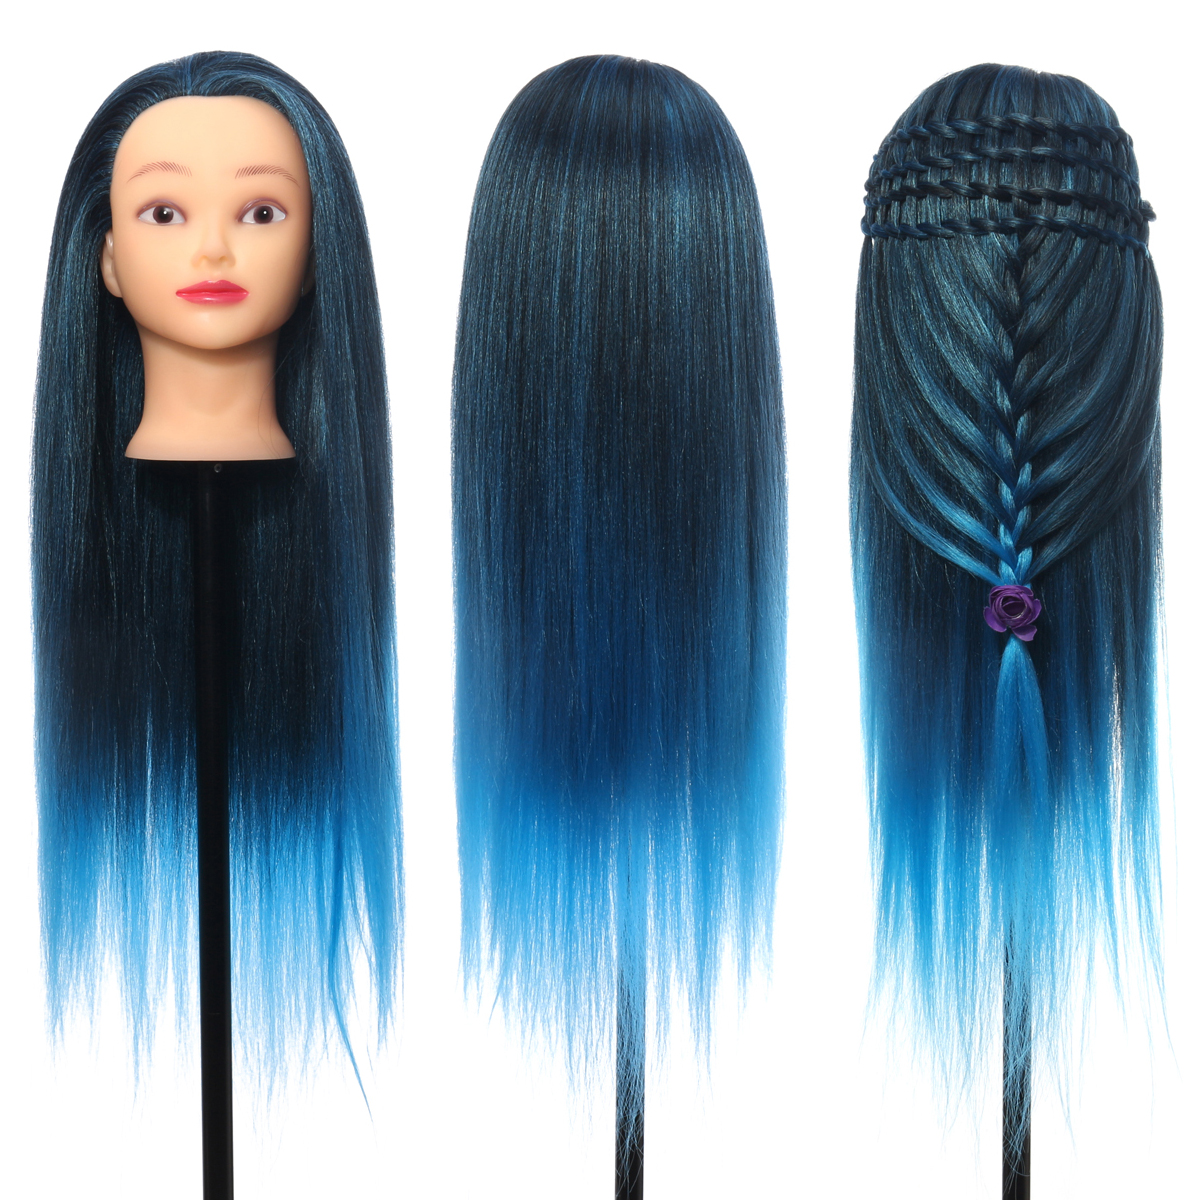 26-Colorful-Hair-Hairdressing-Practice-Training-Head-Mannequin-Salon-With-Clamp-1236992